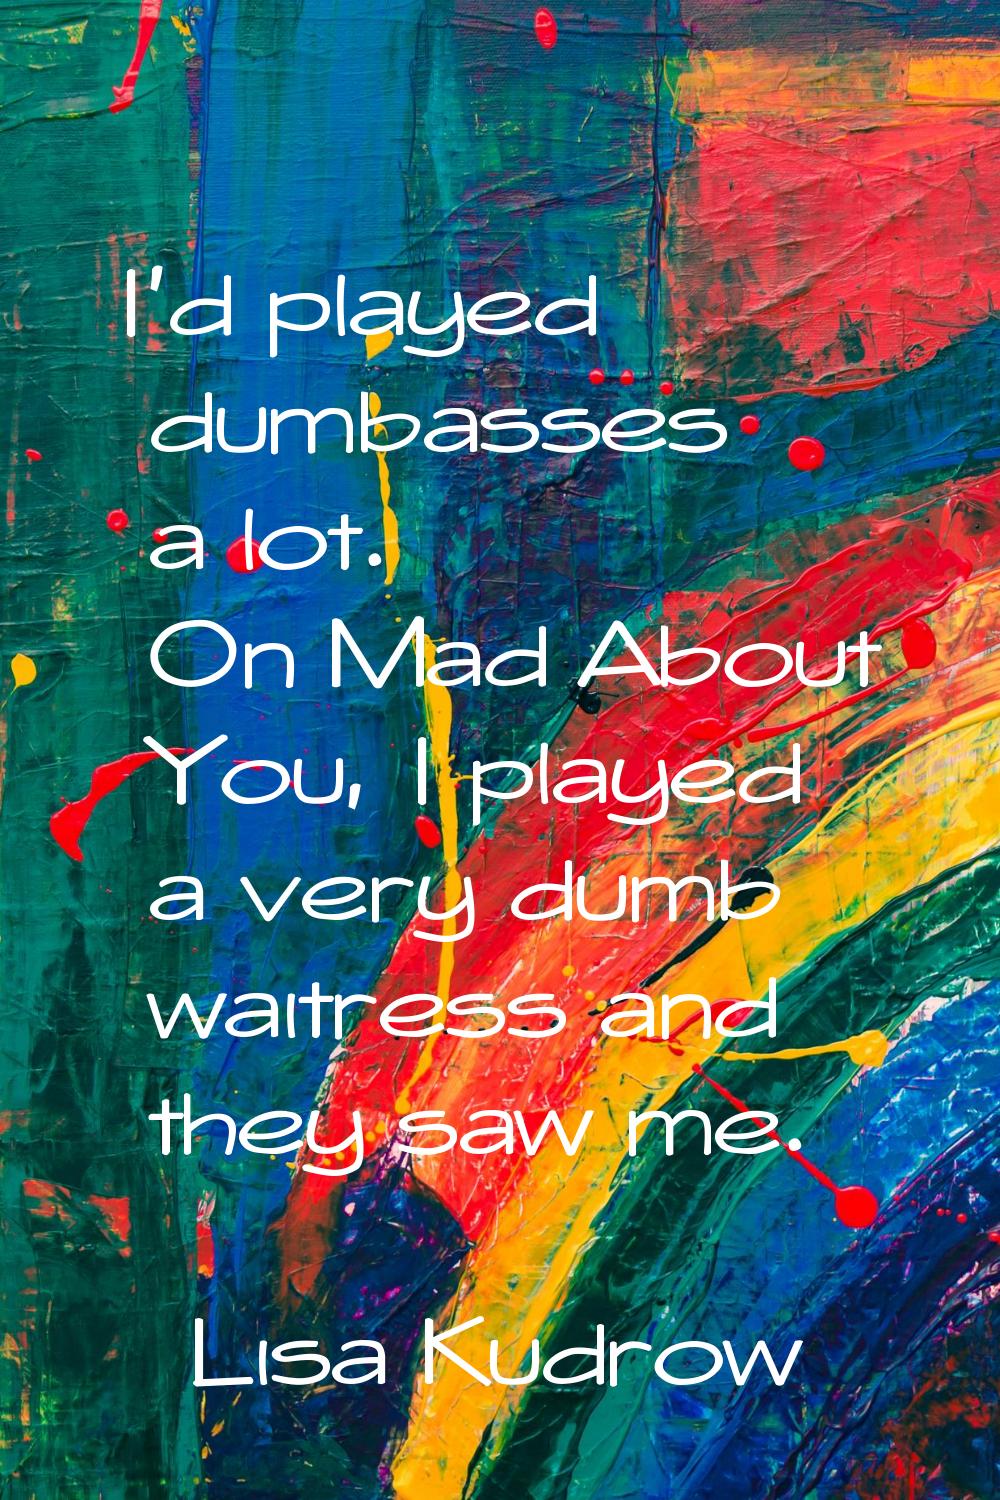 I'd played dumbasses a lot. On Mad About You, I played a very dumb waitress and they saw me.